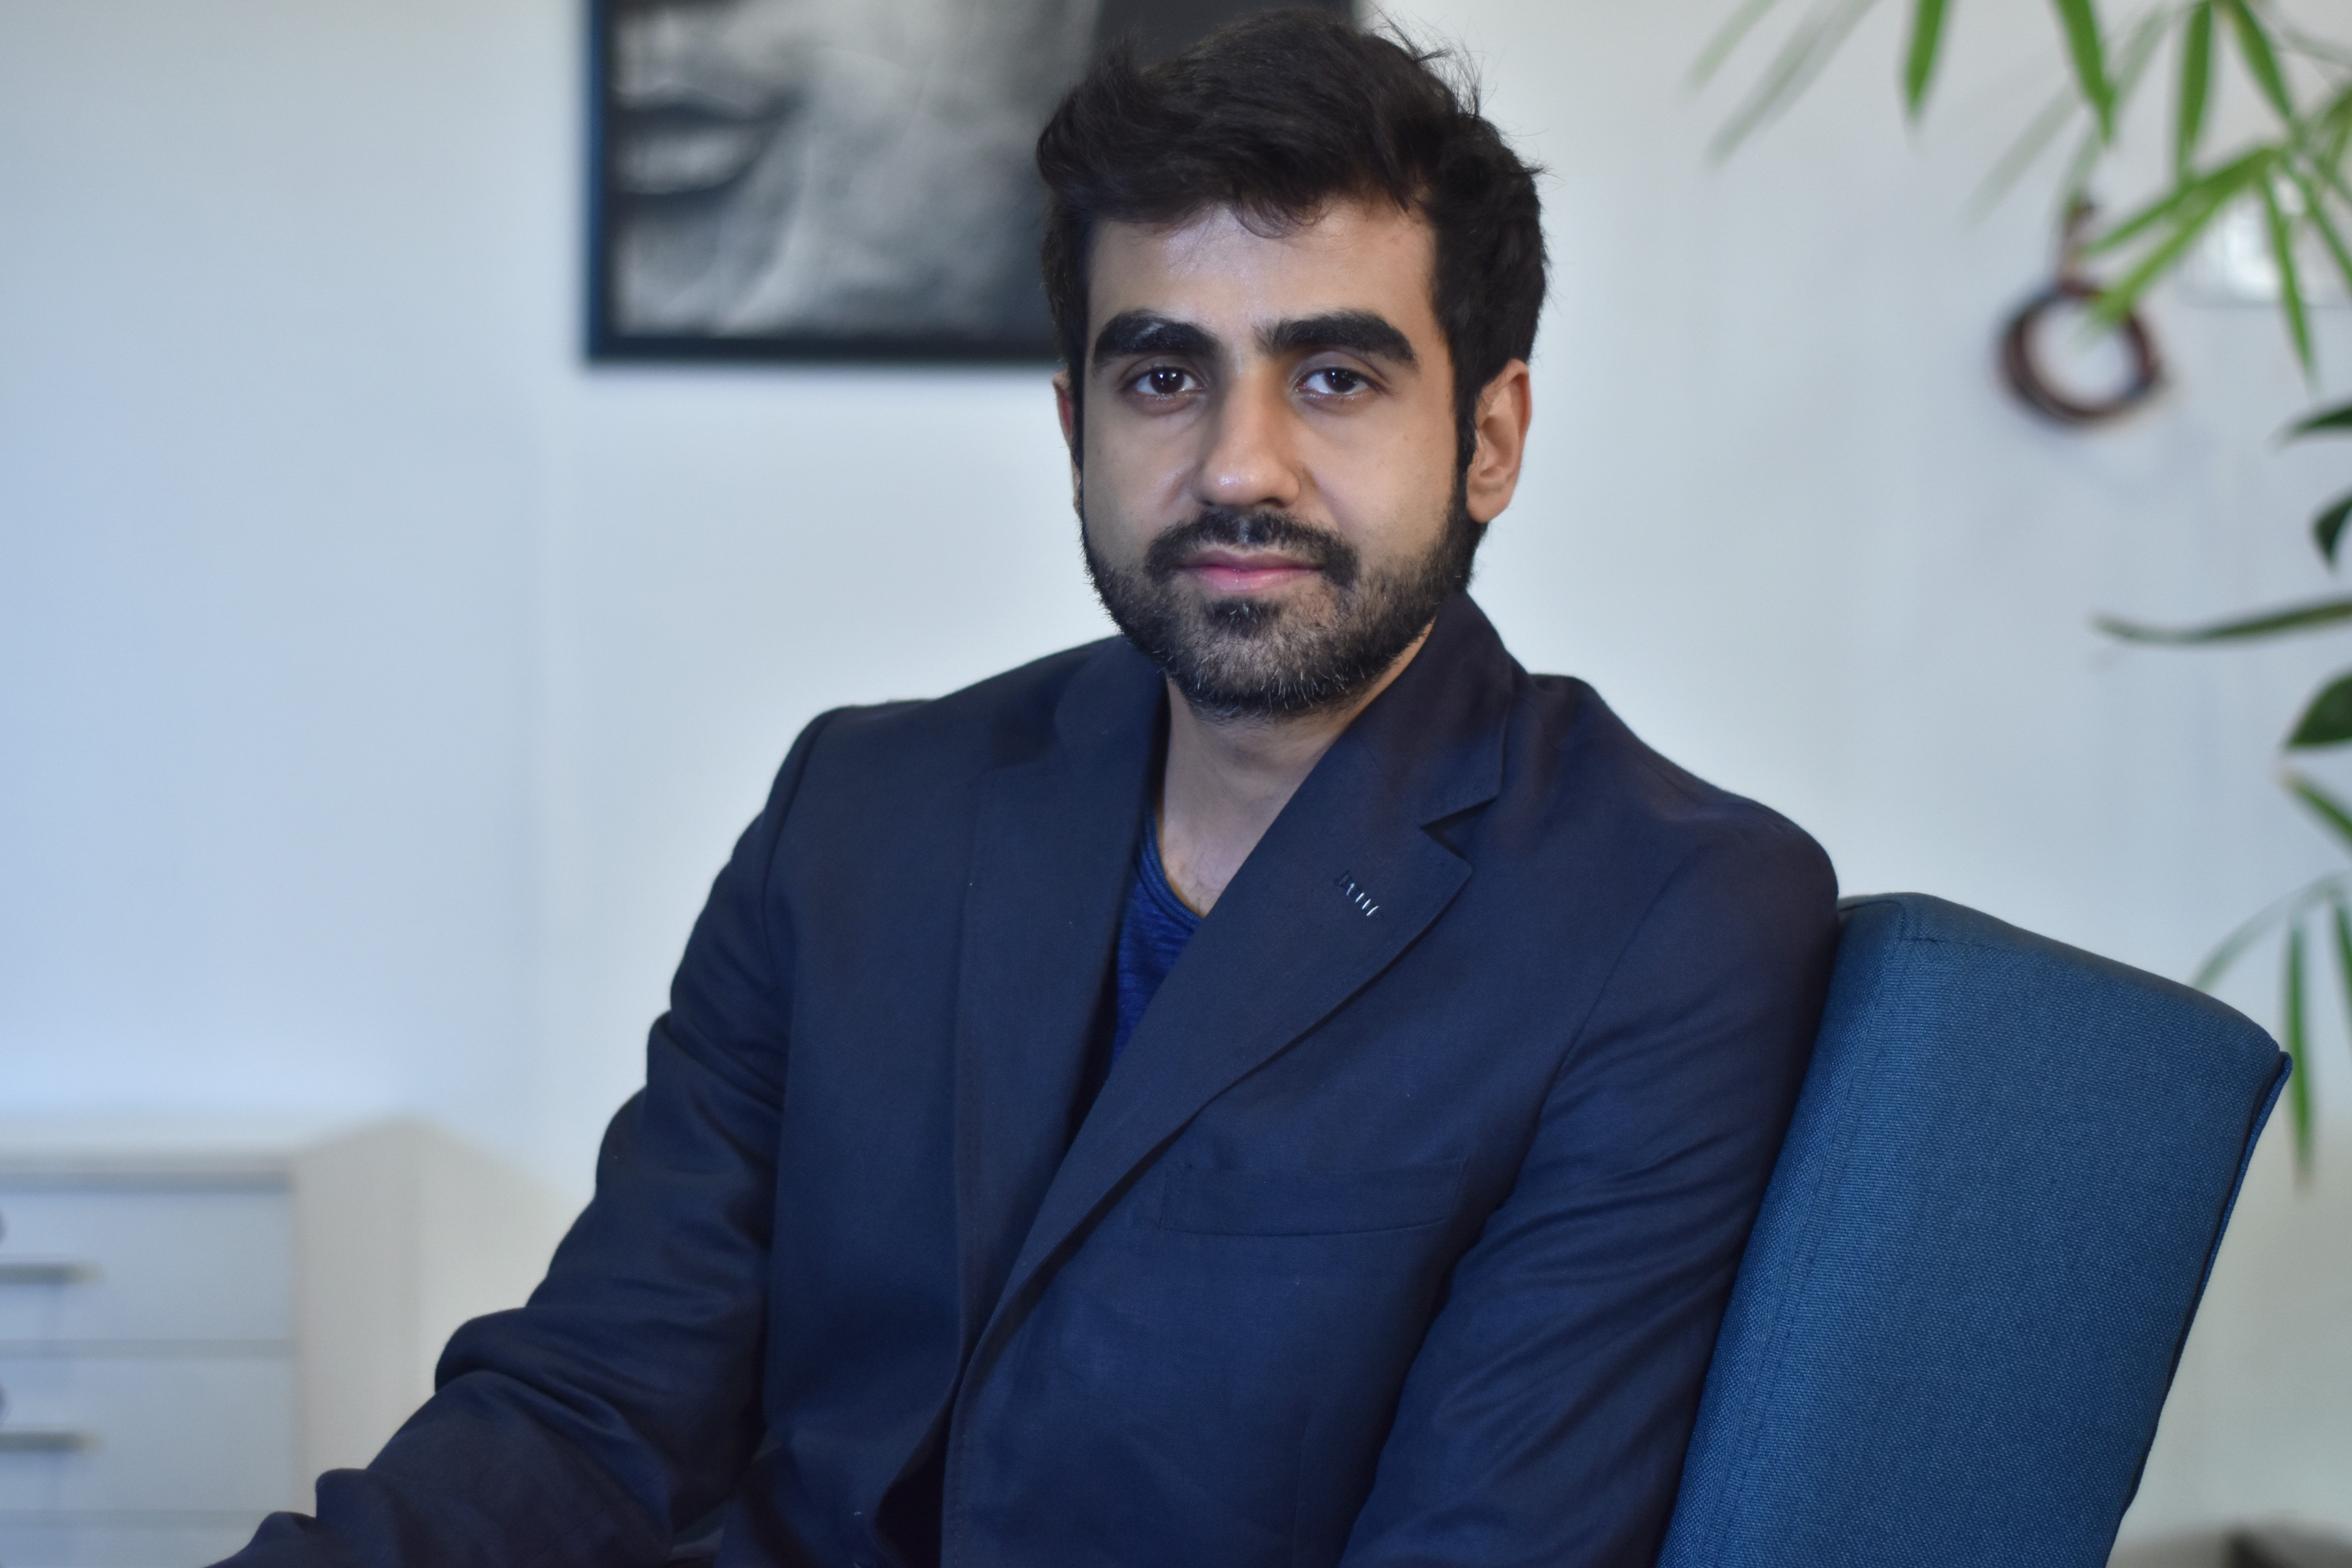 ‘Share Market is Negatively Impacted by the Union Budget for Short Term’ : Nikhil, Zerodha Co-founder